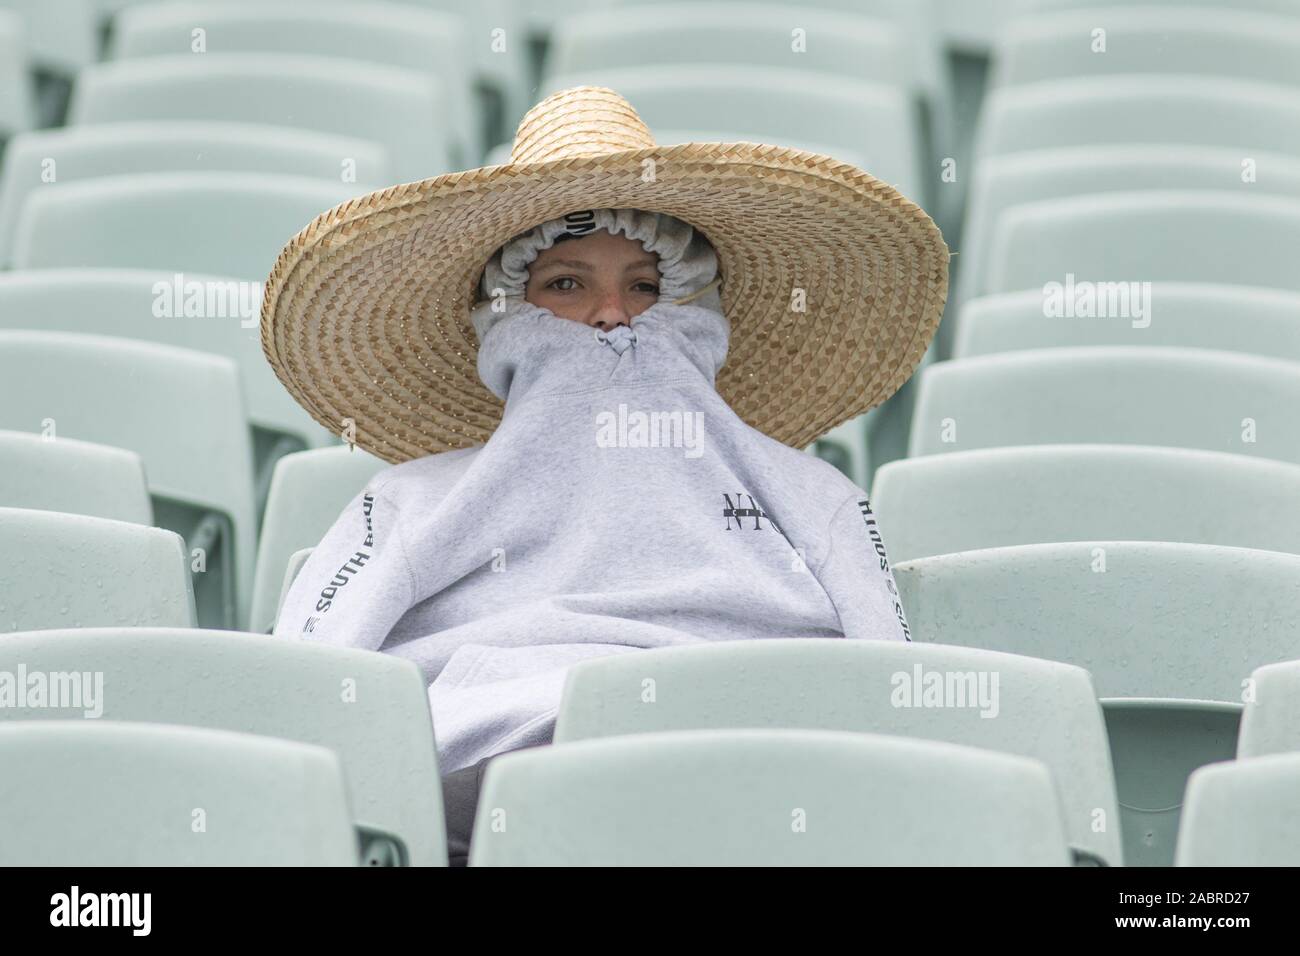 Adelaide, Australia 29 November 2019. Young Australian cricket fans during a rain delay on the opening day  of the 2nd Domain Day Night test between Australia and Pakistan at the Adelaide Oval. Australia leads 1-0 in the 2 match series .Credit: amer ghazzal/Alamy Live News Stock Photo